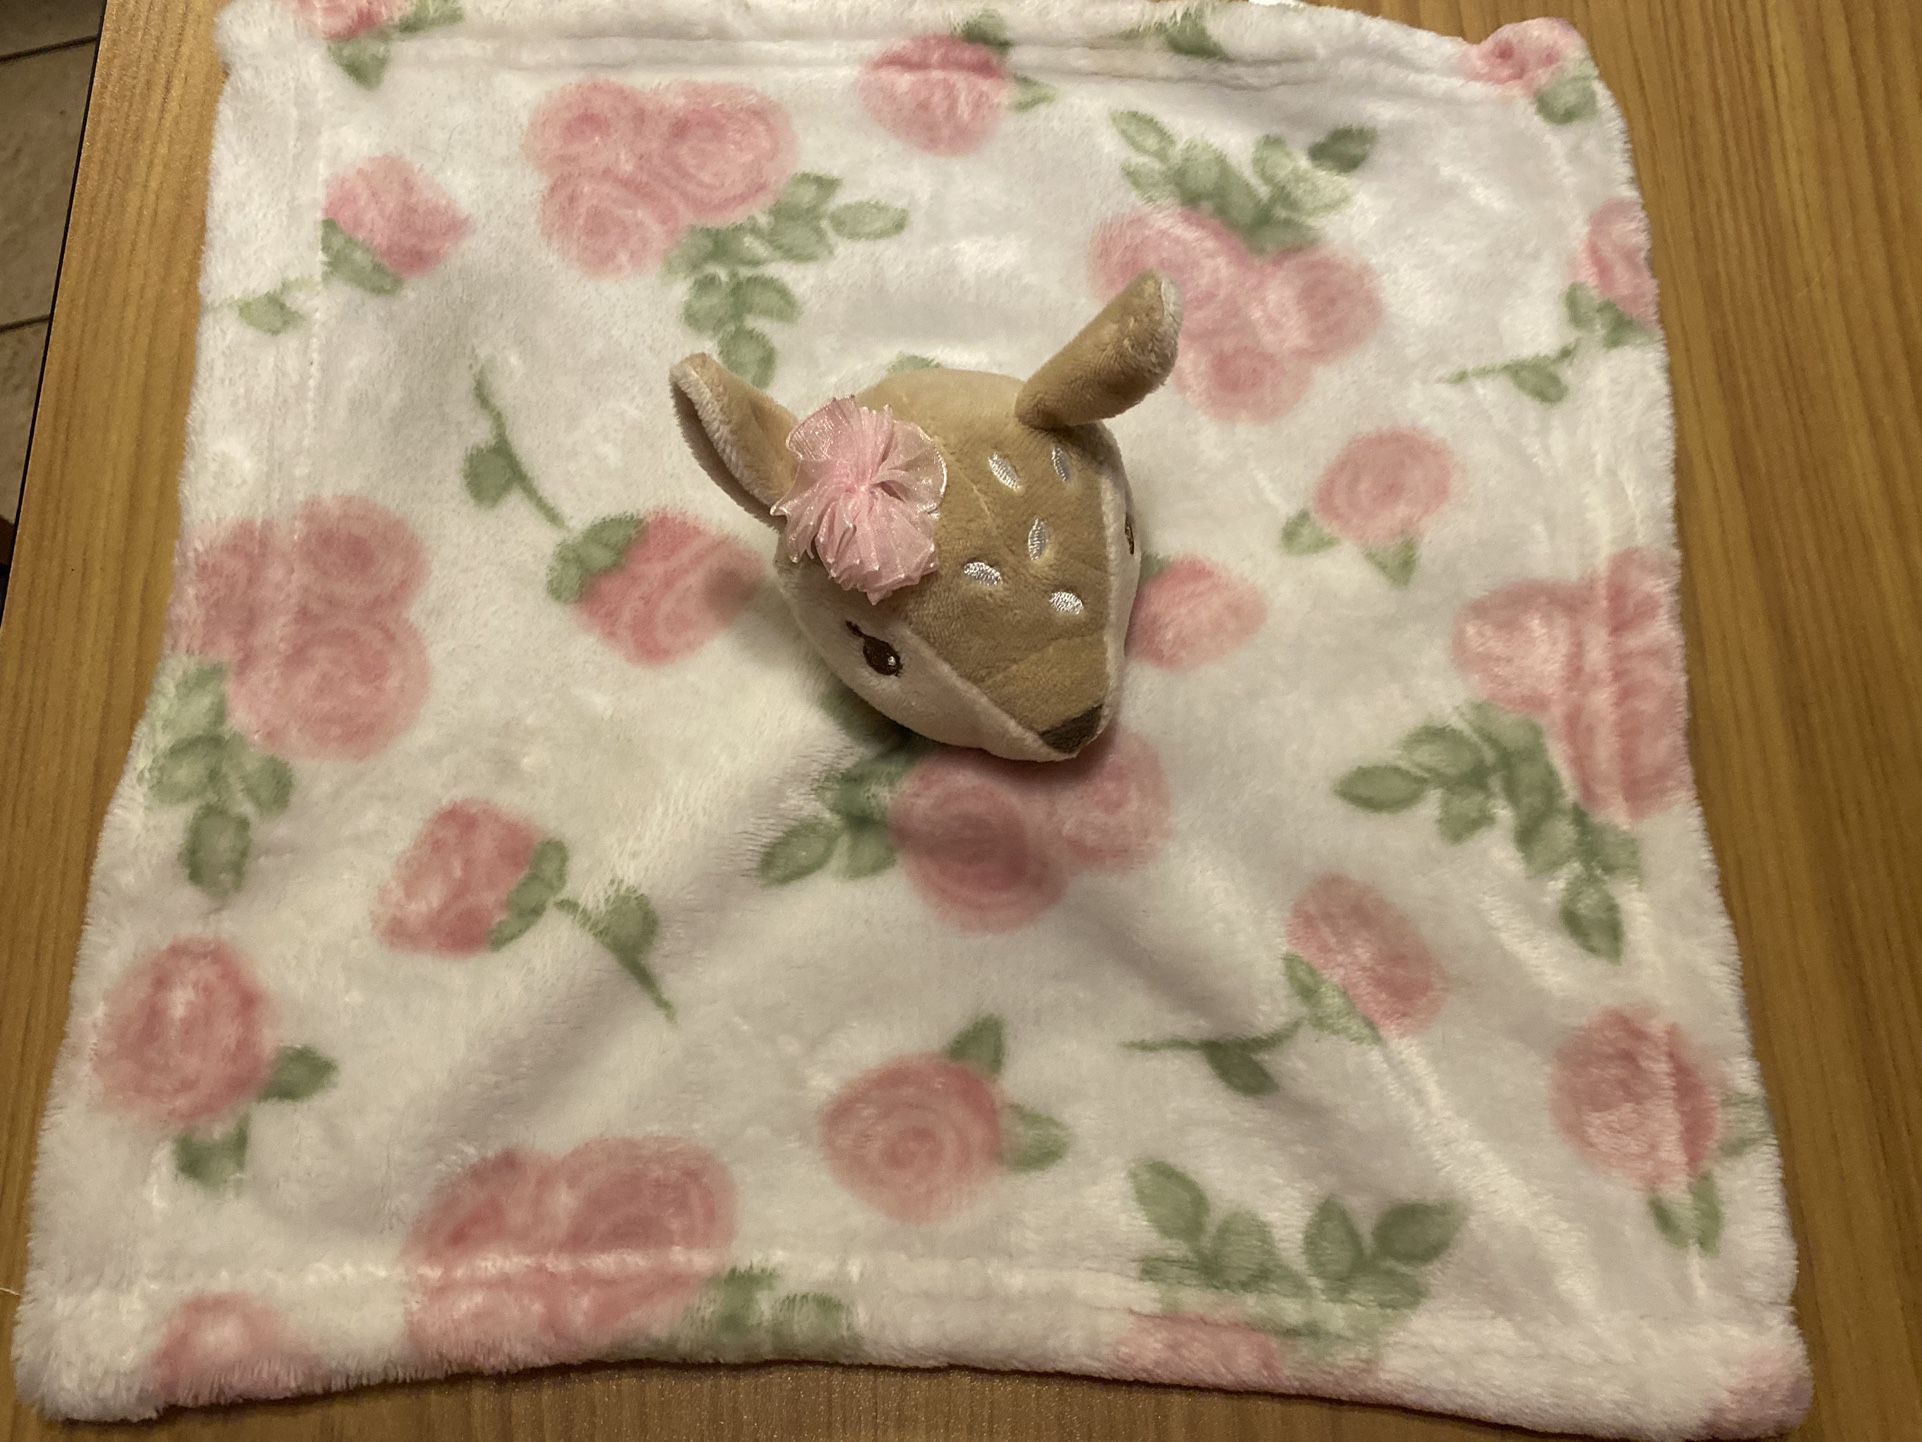 HB Hudson Baby FAWN Deer SECURITY BLANKET White Pink Roses Soft Plush LOVEY EUC